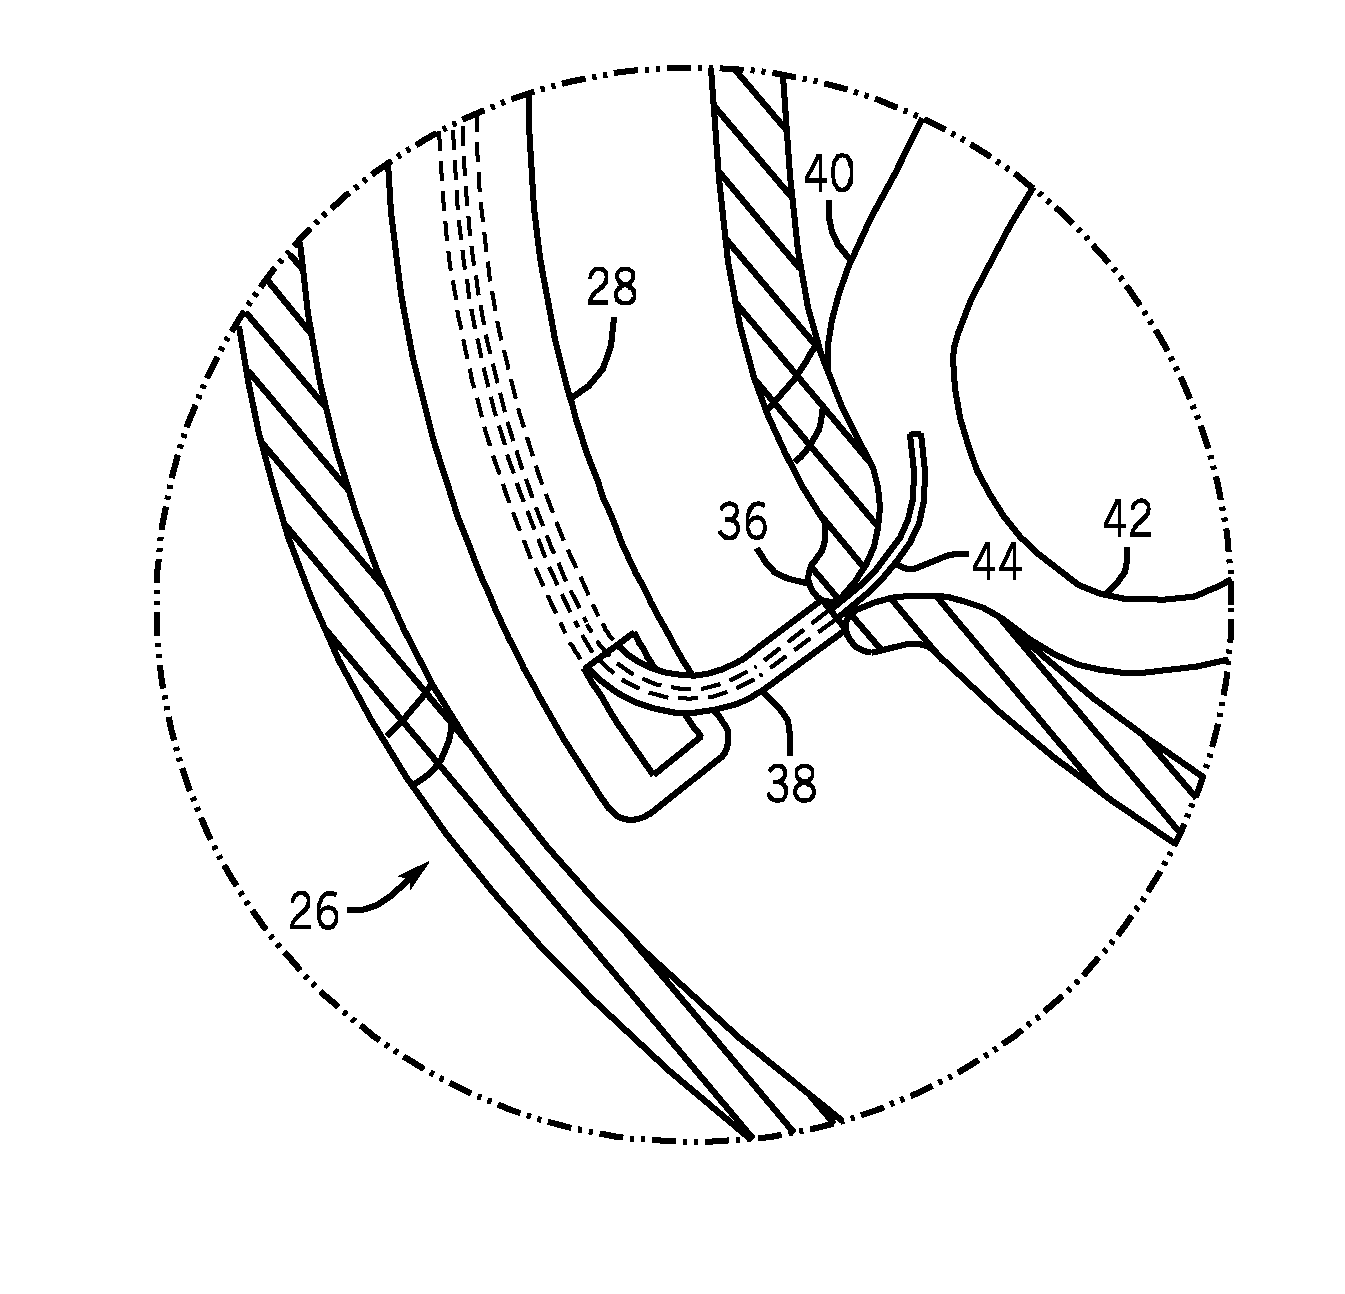 Methods and apparatuses for endoscopic retrograde cholangiopancreatography